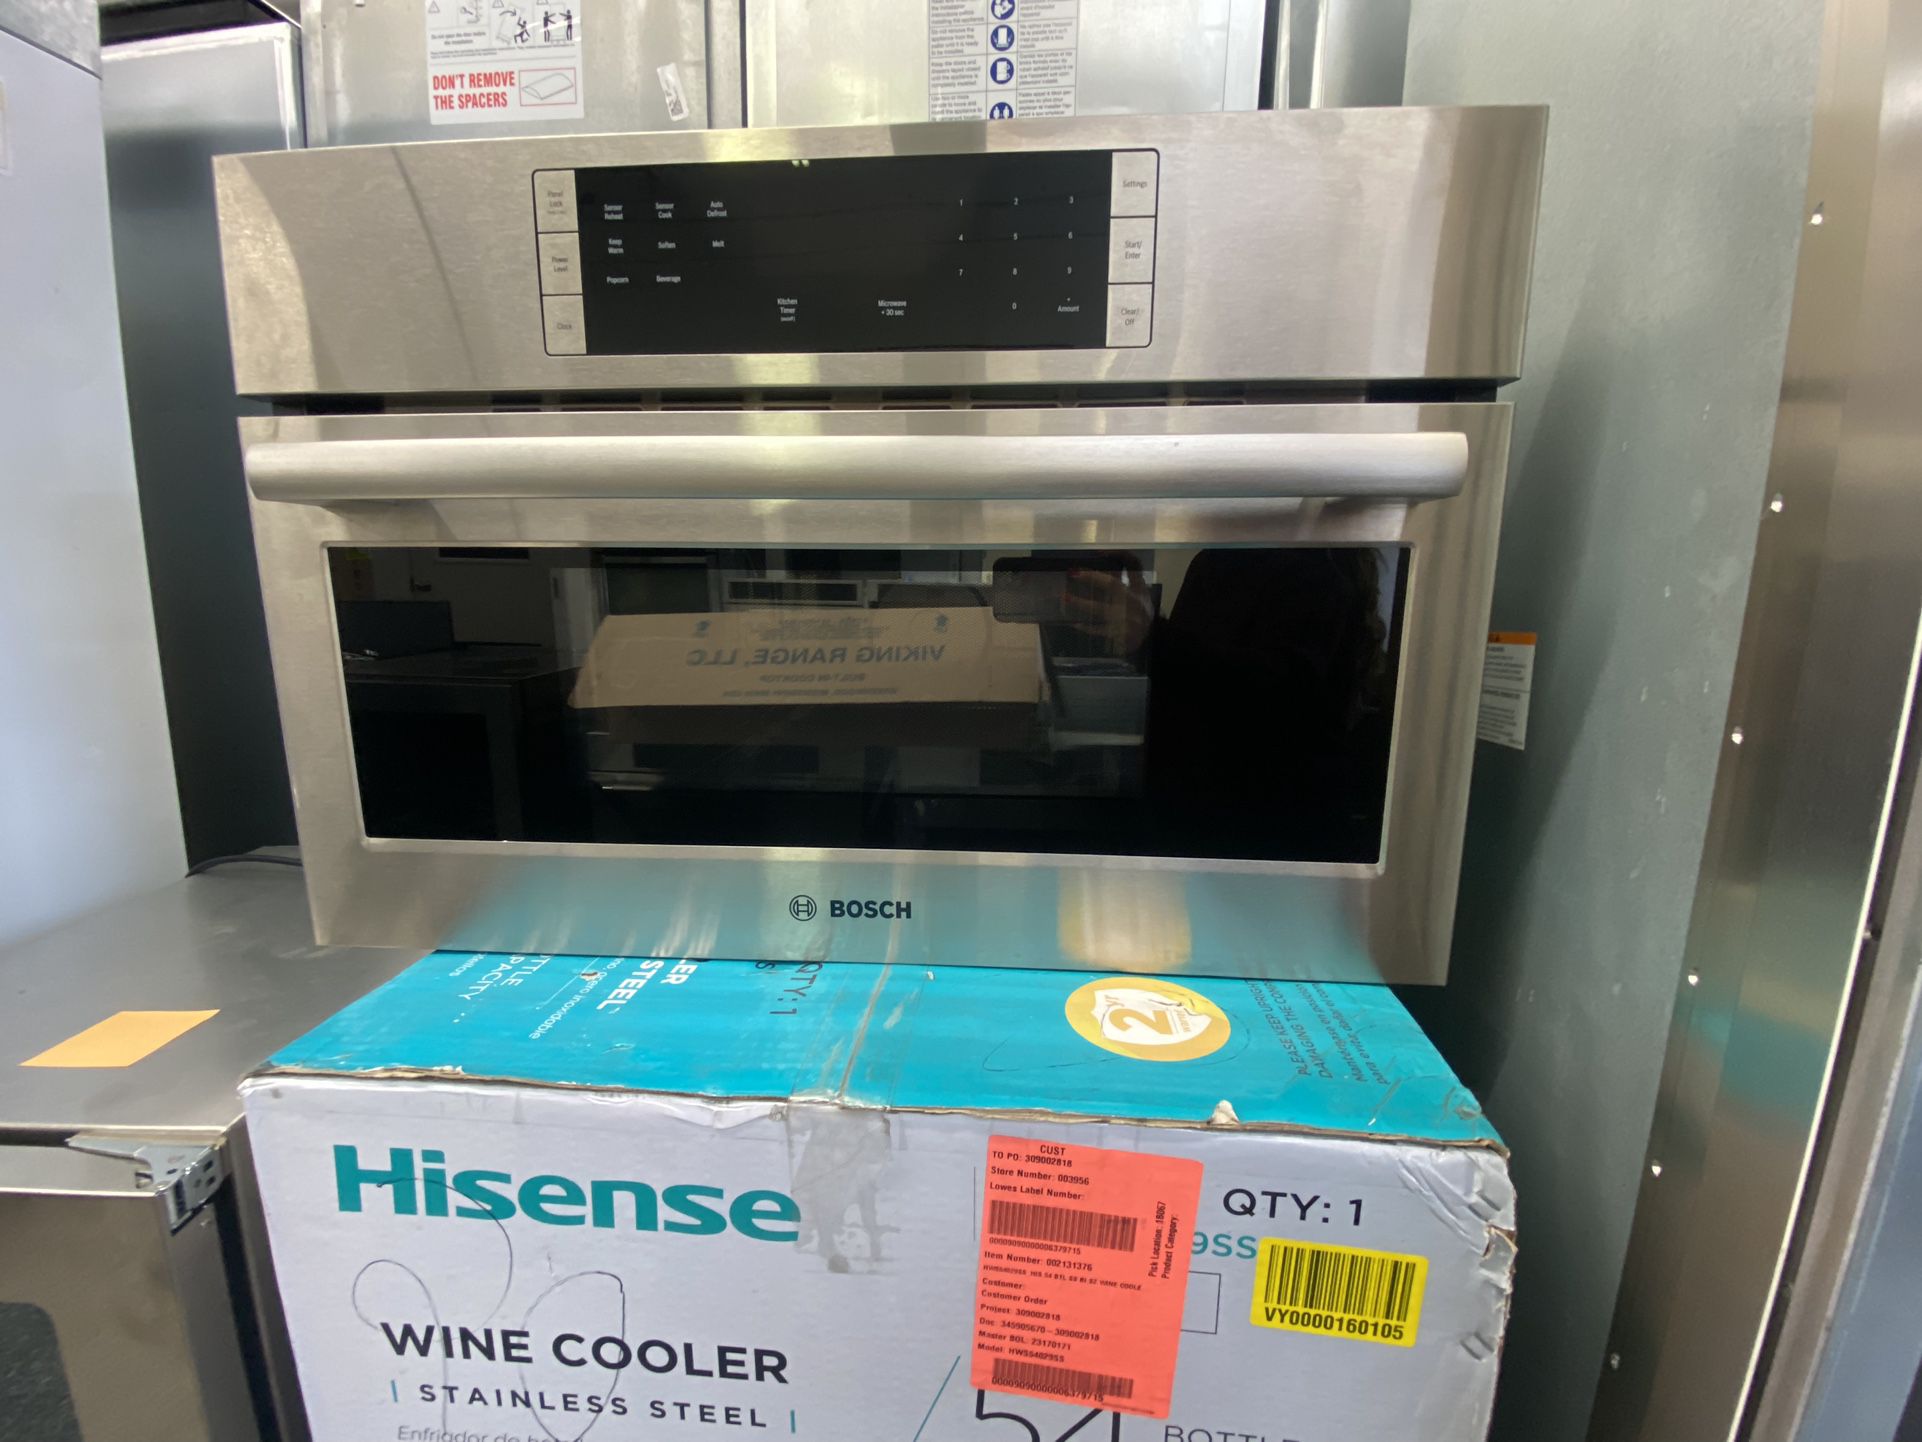 30” BOSCH BUILT IN MICROWAVE OVEN 